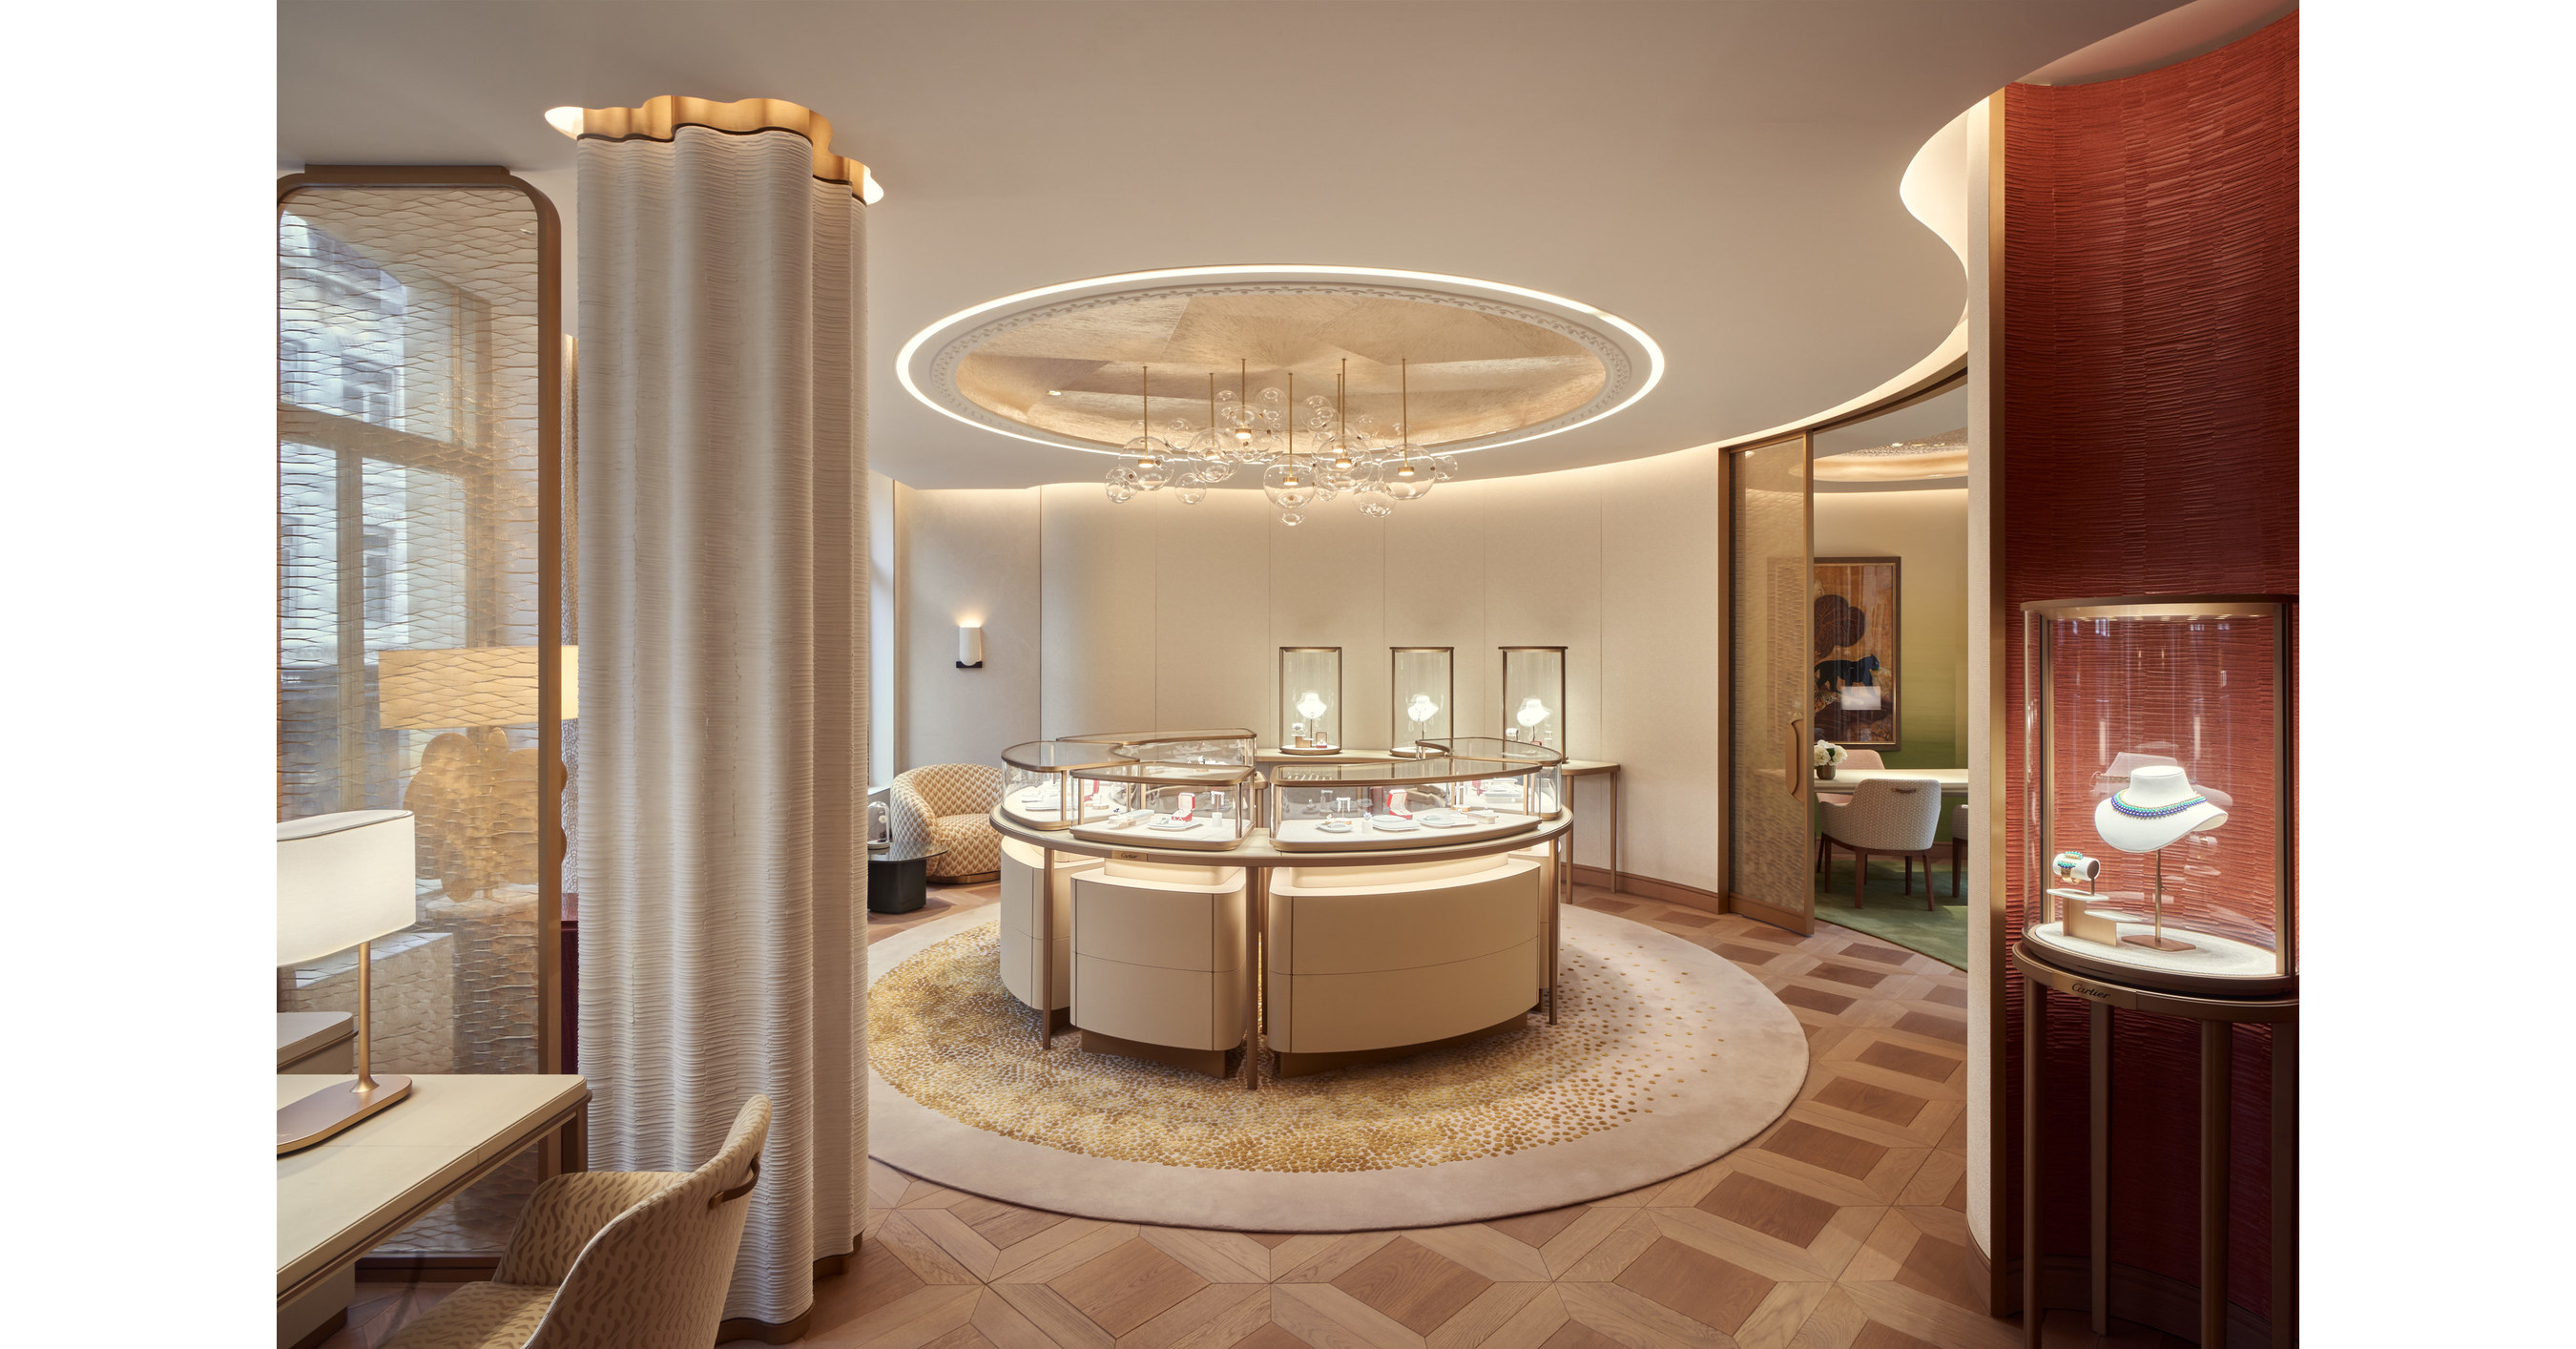 Cartier has opened a new boutique at the P.C. Hooftstraat in Amsterdam